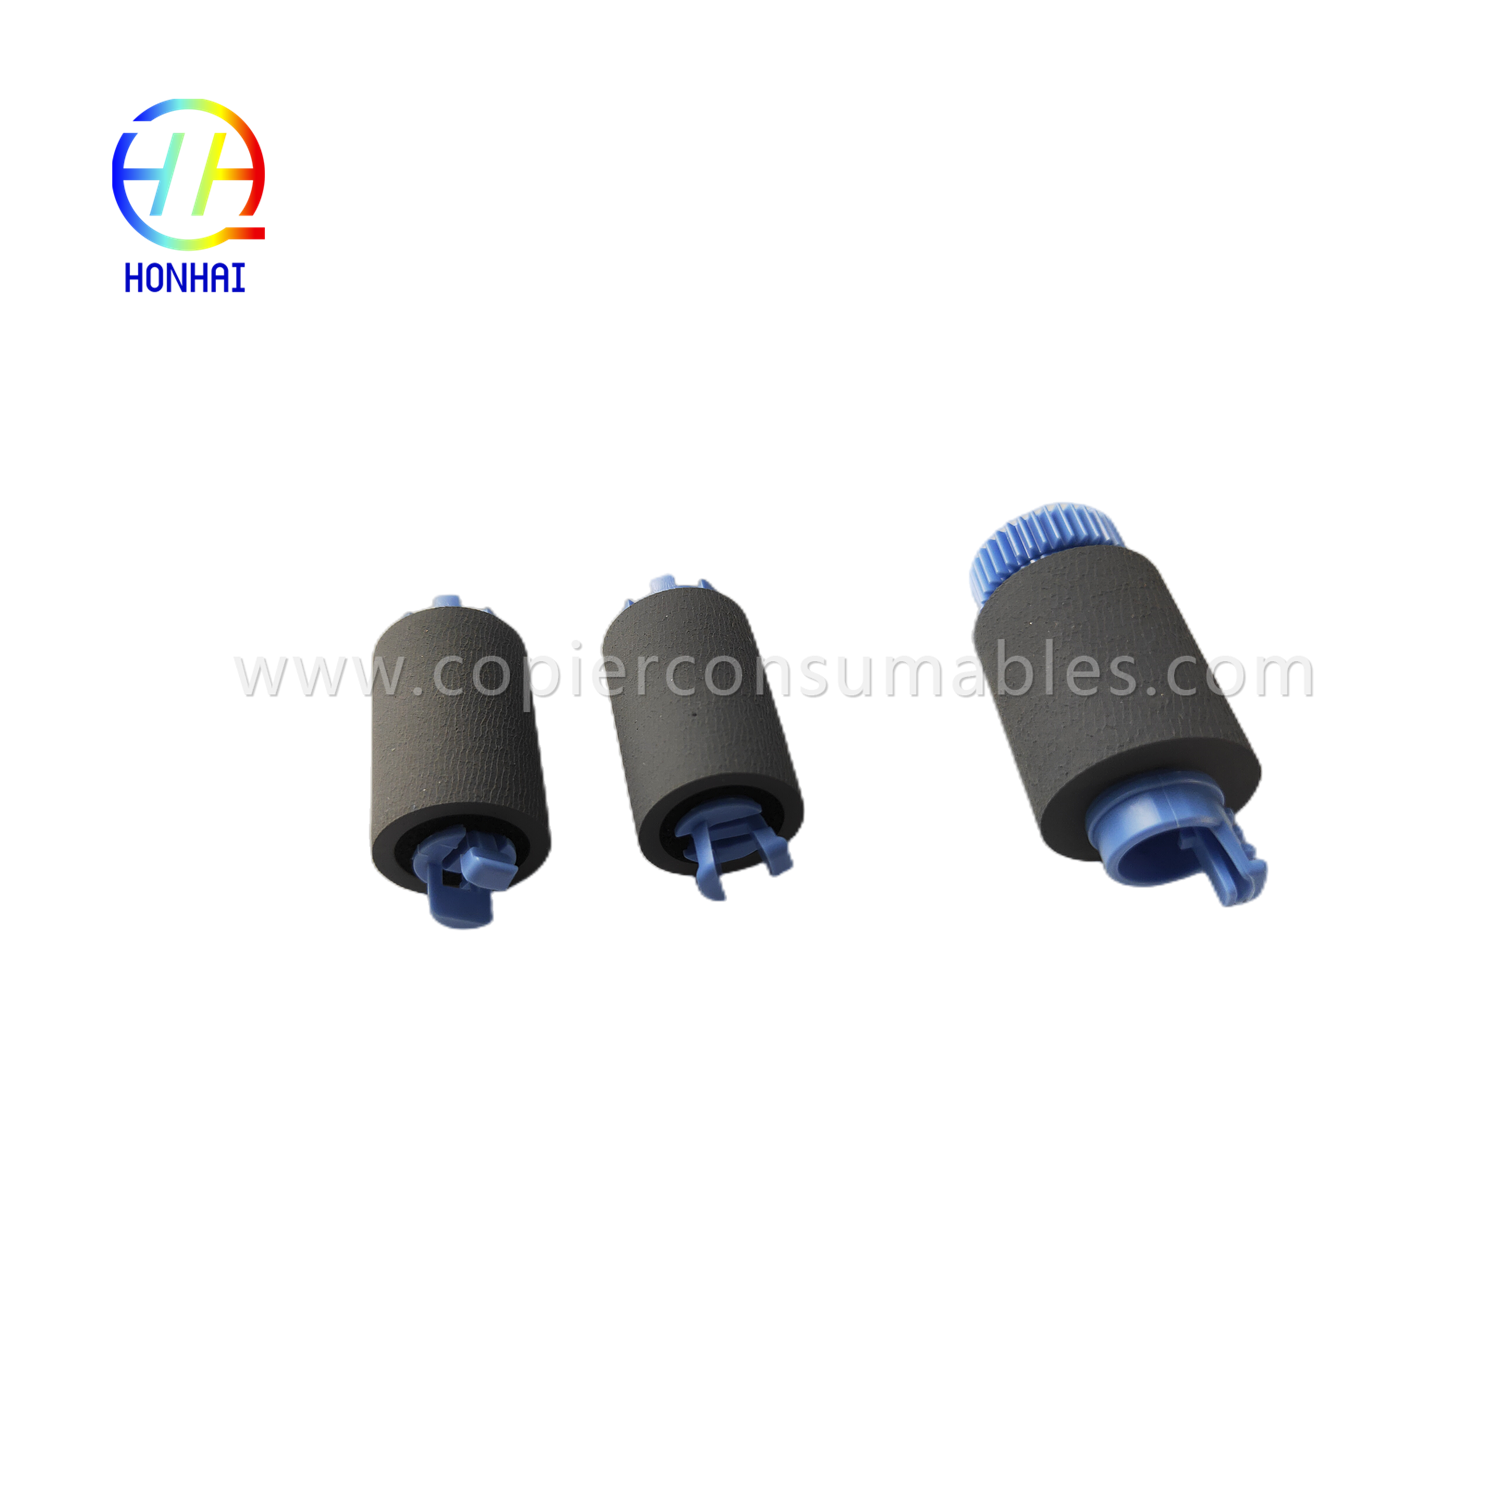 https://www.copierconsumables.com/tray-2-5-pickup-feed-separation-roller-set-for-hp-a7w93-67082-mfp-785f-780dn-e77650z-e77660z-e77650dn-e77660dn-p77740dn- p77750z-p77760z-p75050dn-p75050dw-produkt/